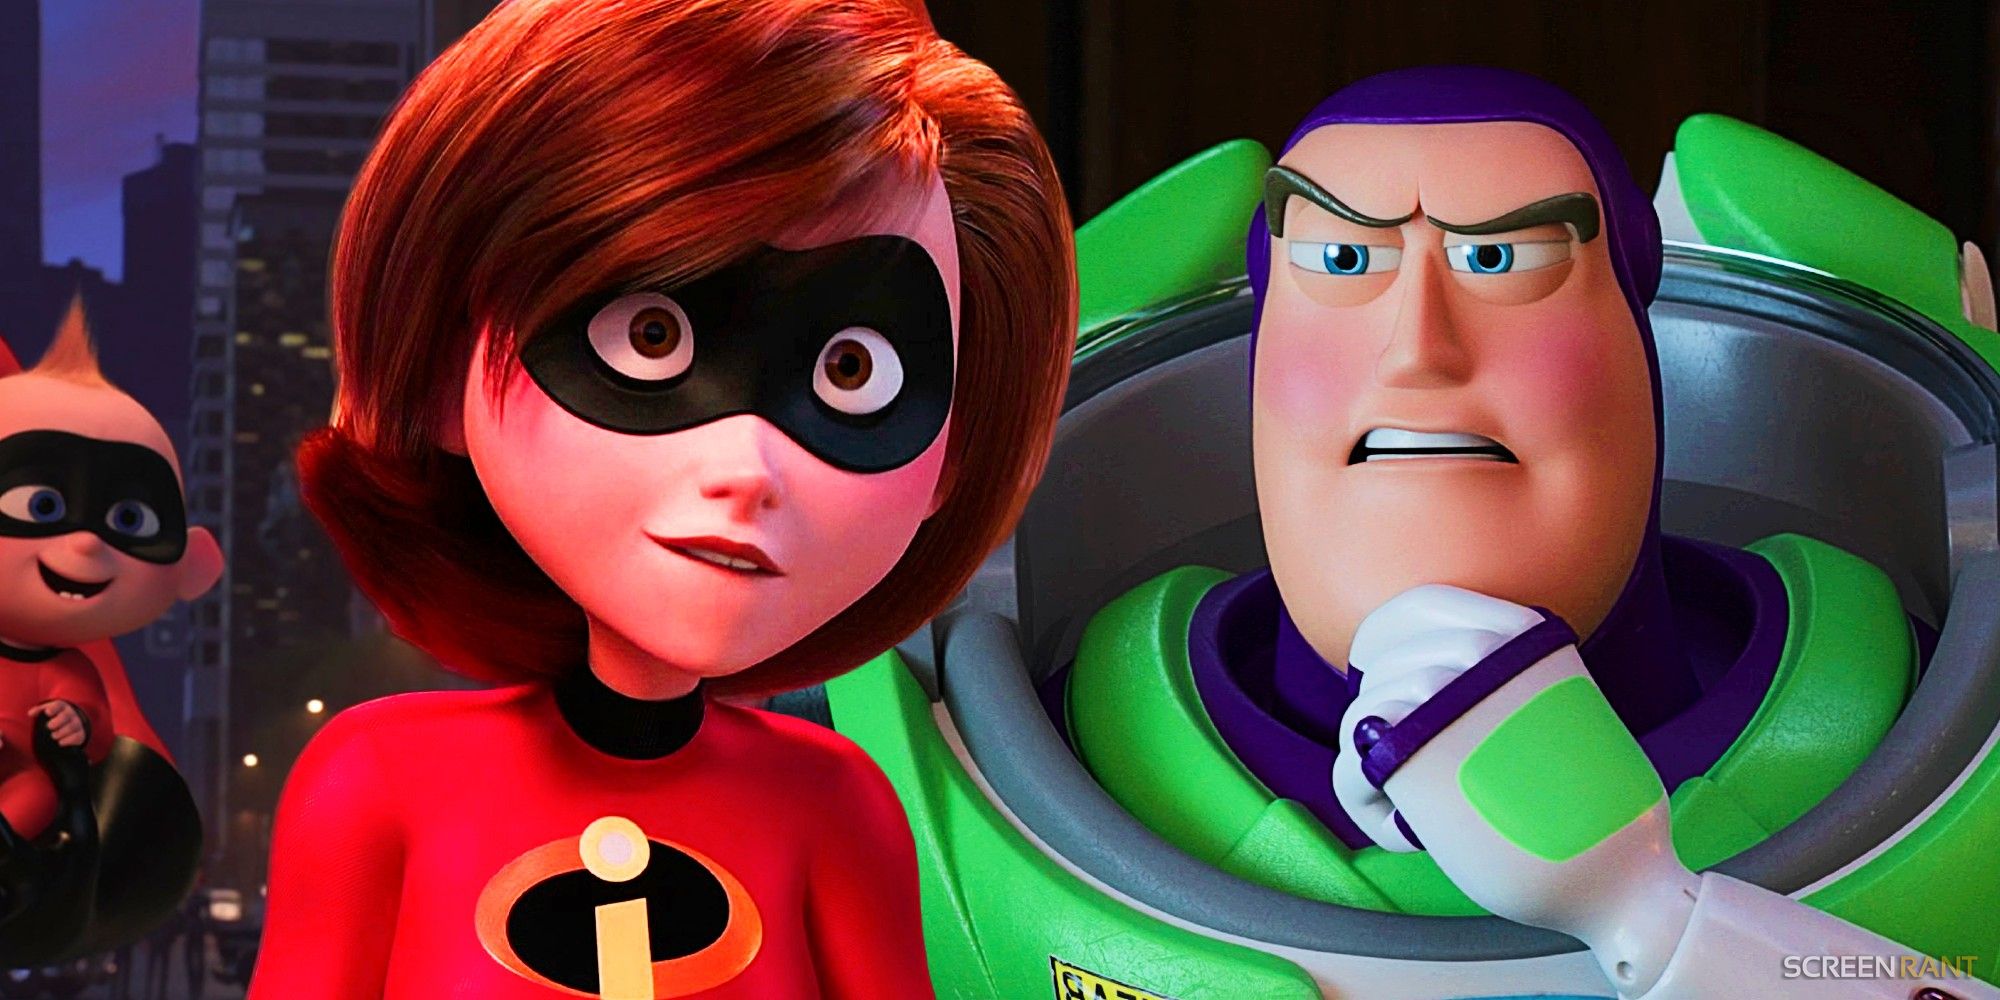 Elastigirl in Incredibles 2 and Buzz Lightyear in Toy Story 4